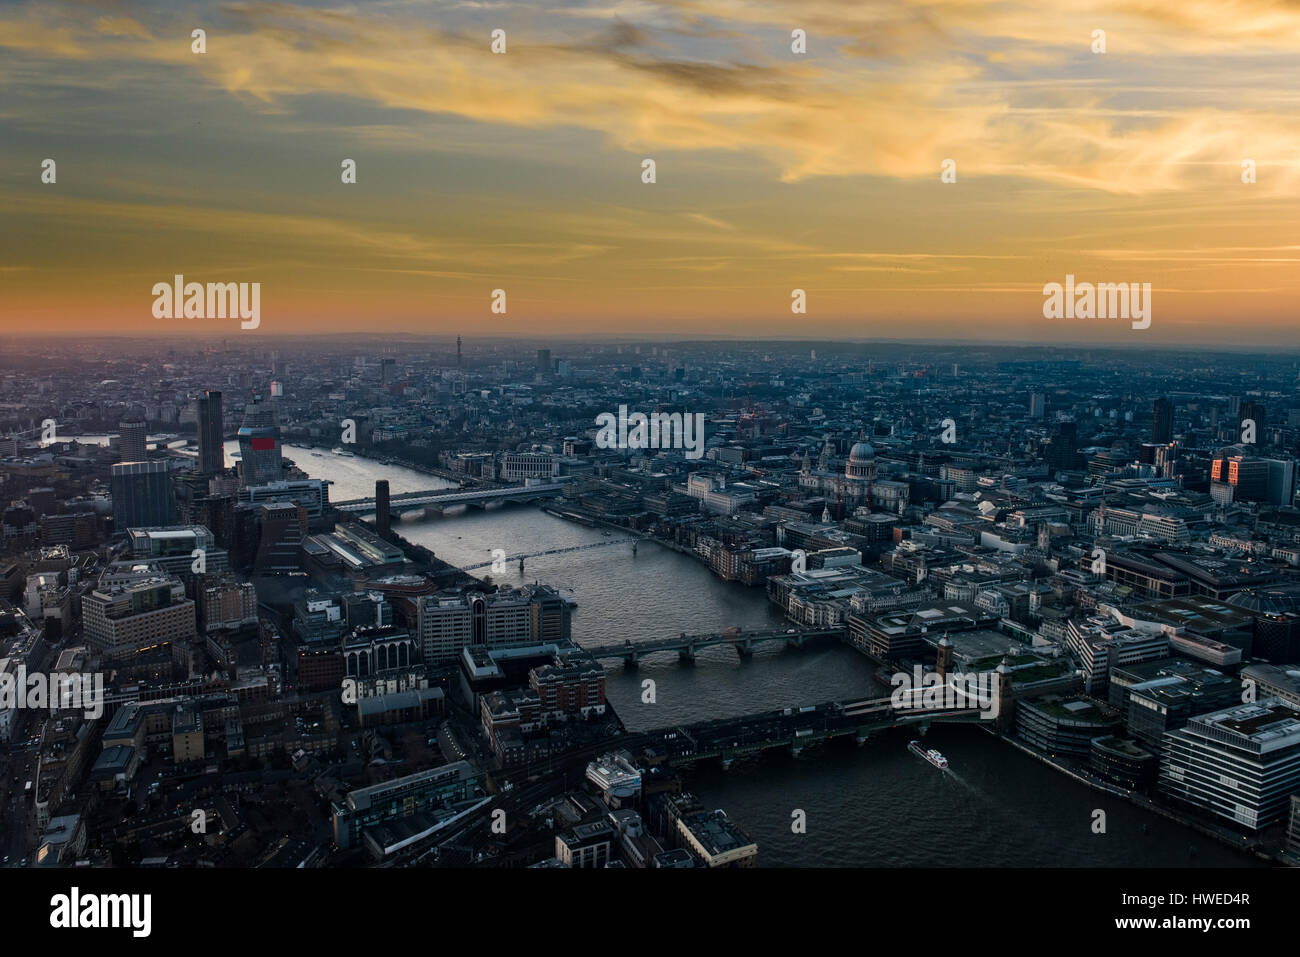 London aerial view at sunset. Stock Photo